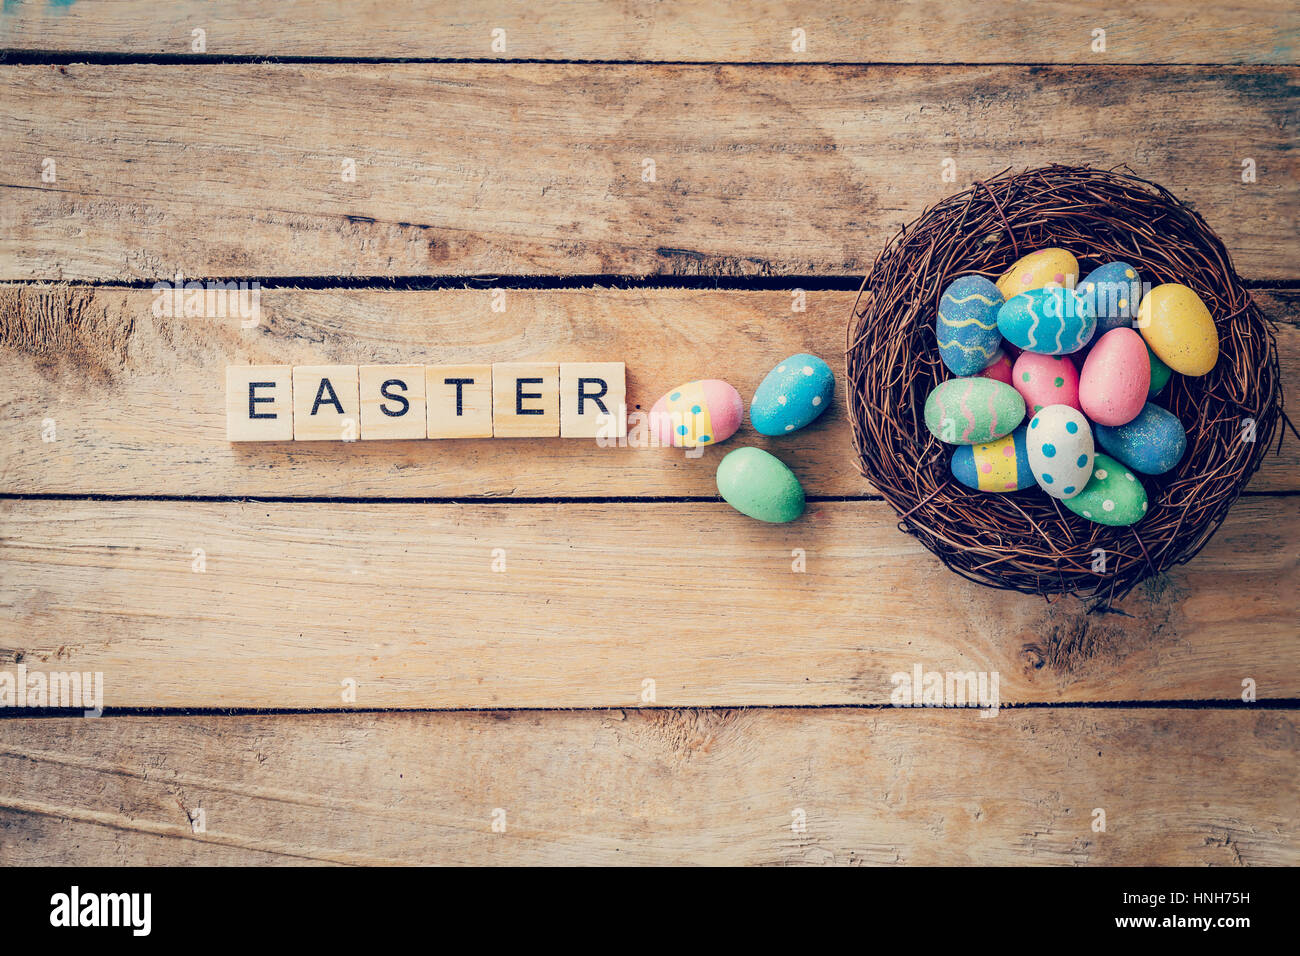 Colorful easter egg in the nest and wood text for Easter on wood background with space Stock Photo